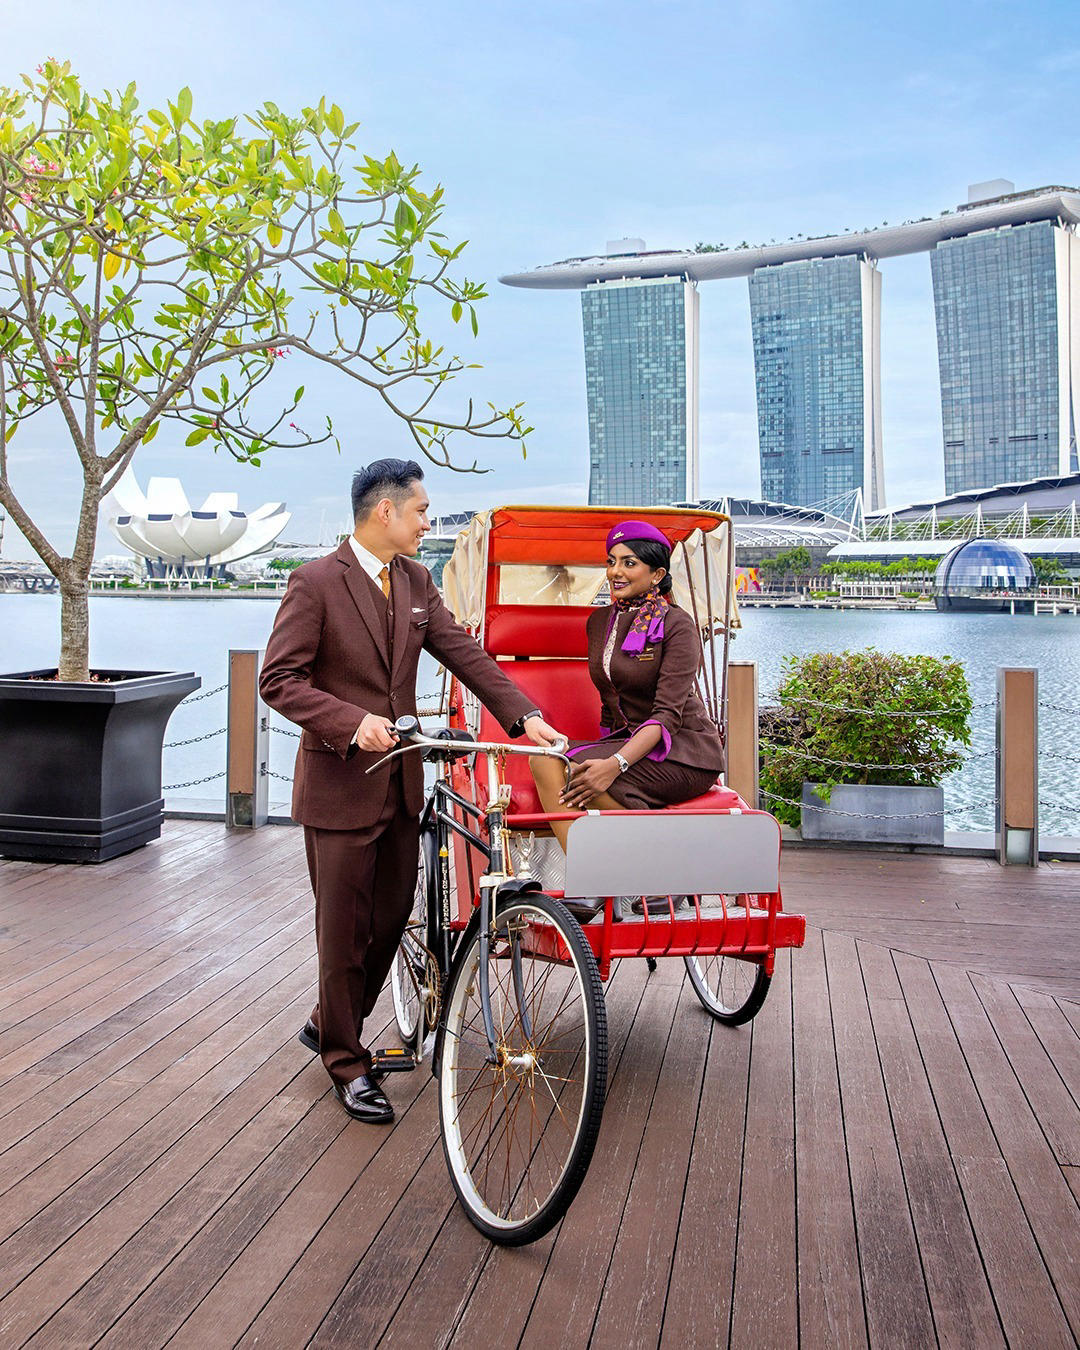 Etihad Airways - We are celebrating 15 years of flying to Singapore, the Lion City